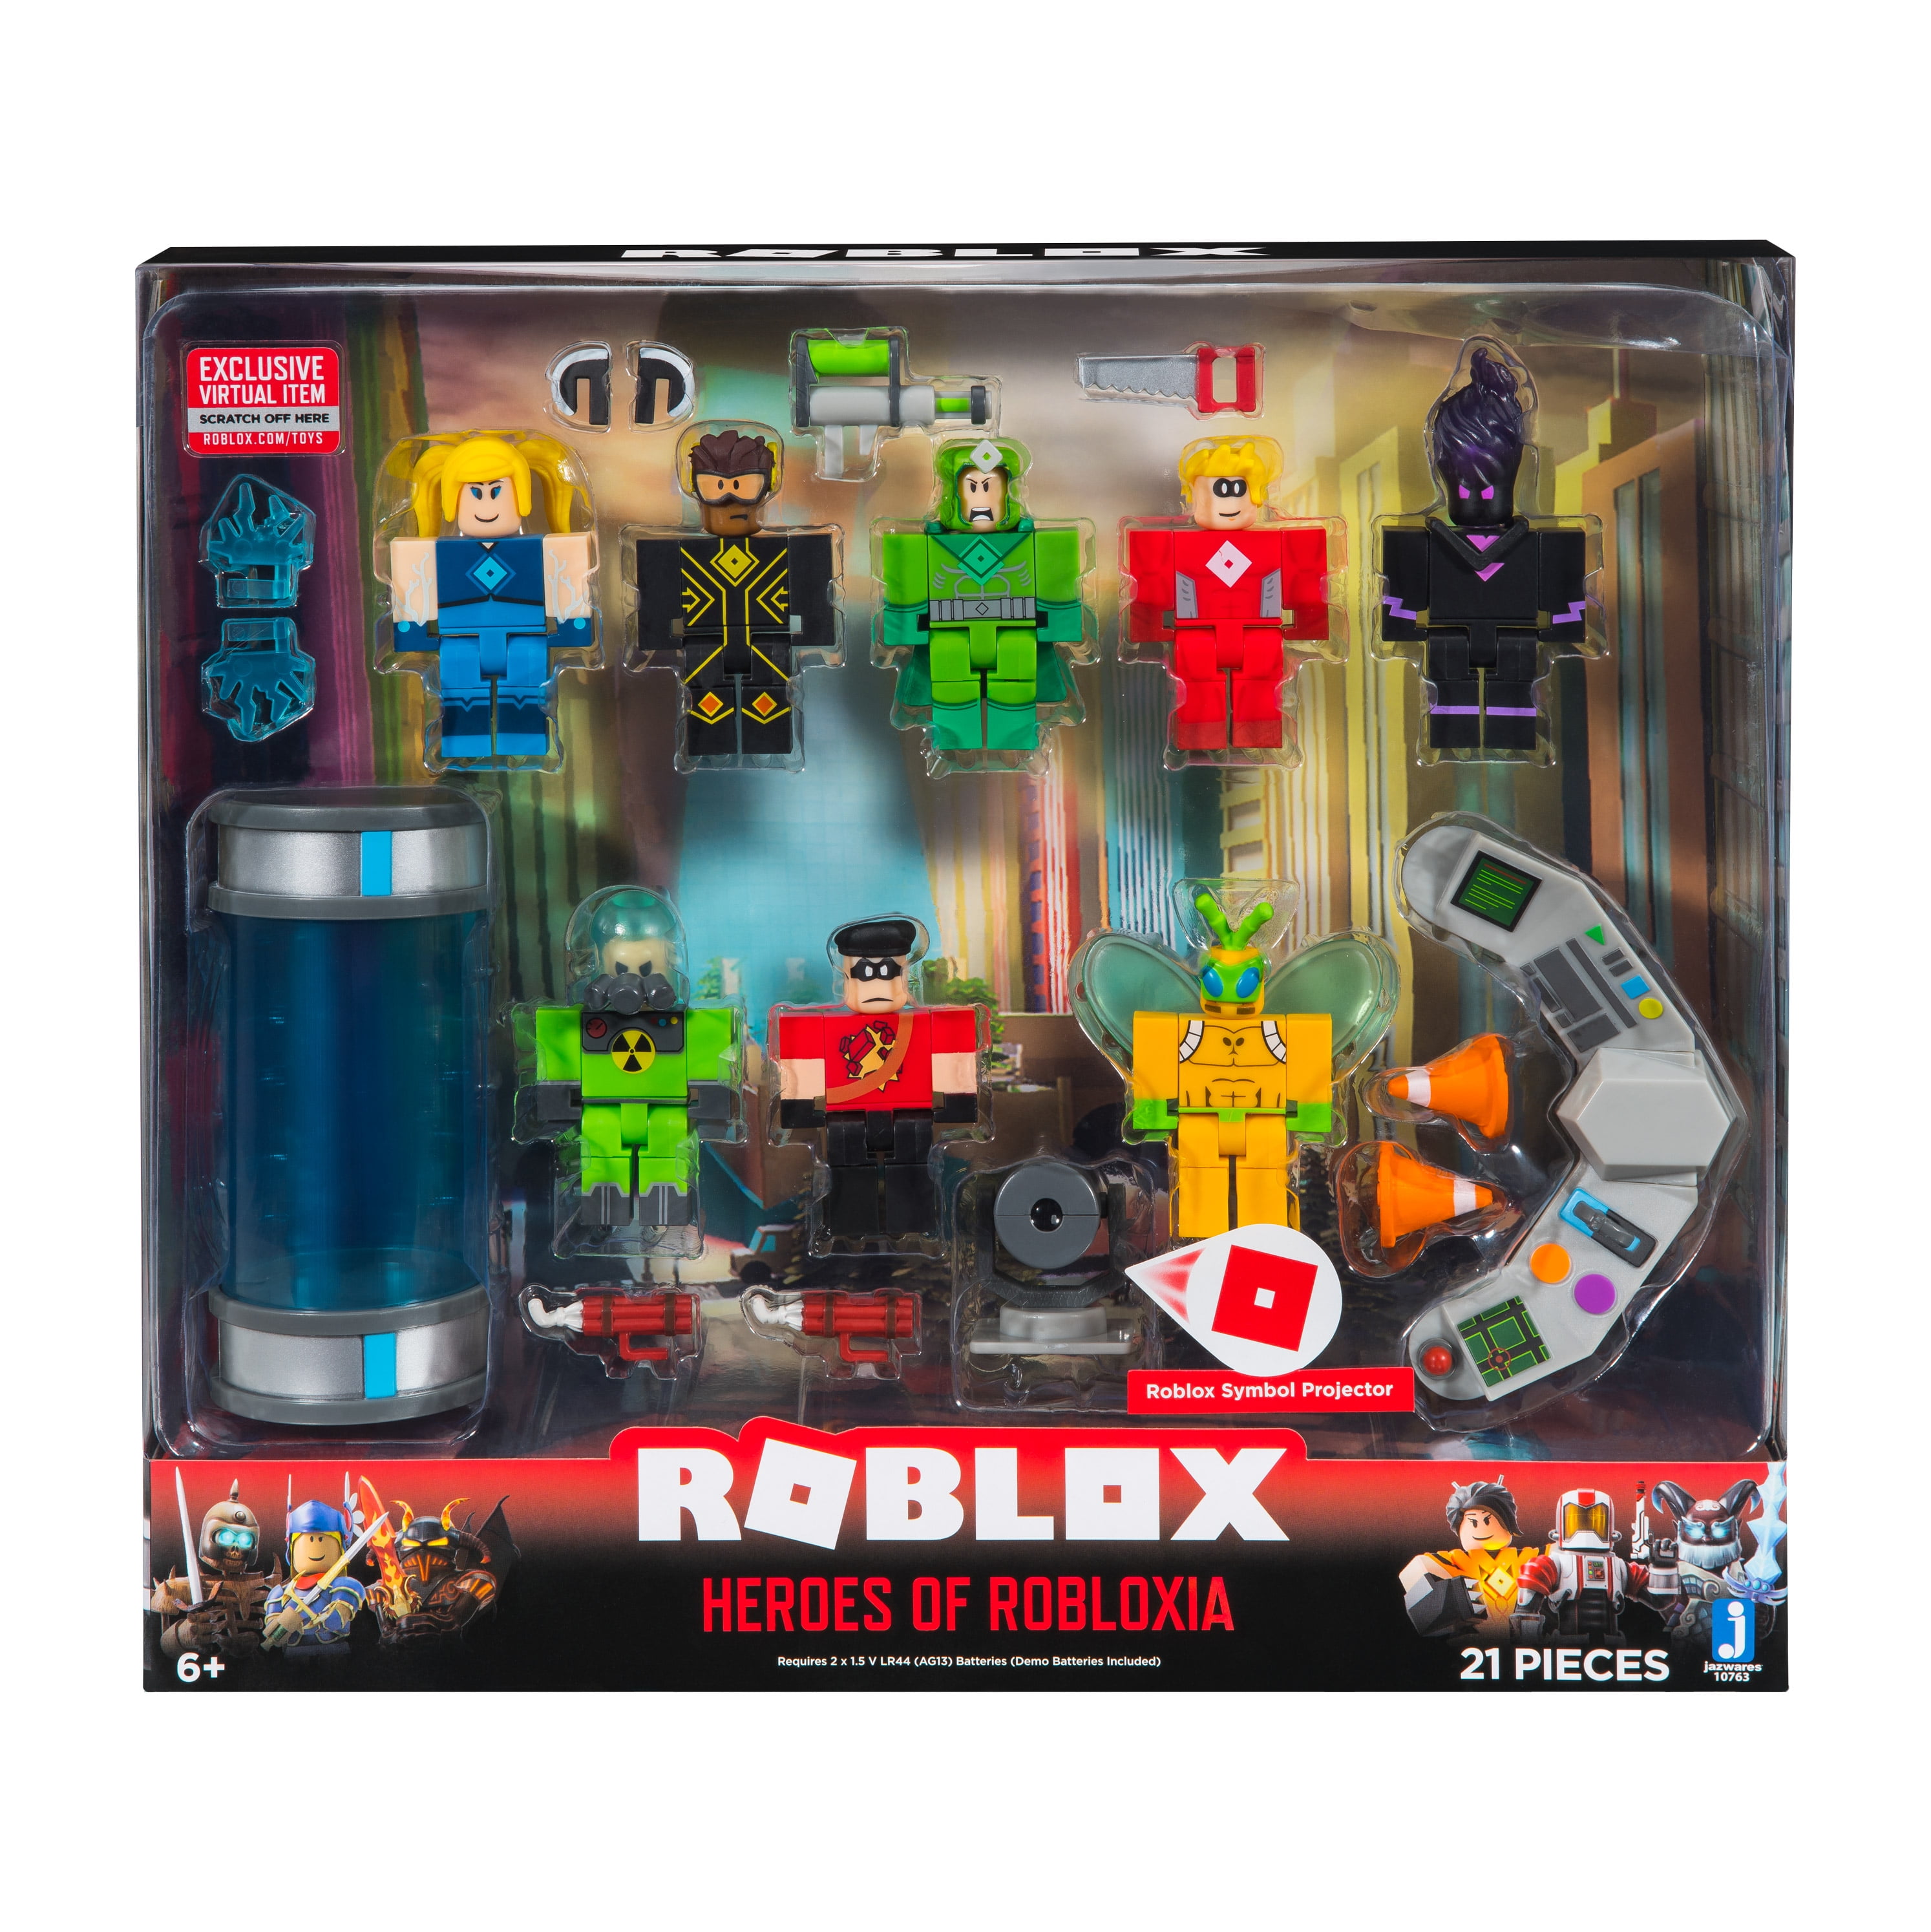 Roblox Action Collection Heroes Of Robloxia Playset Includes Exclusive Virtual Item Walmart Com Walmart Com - top 5 most op items in roblox roblox amino